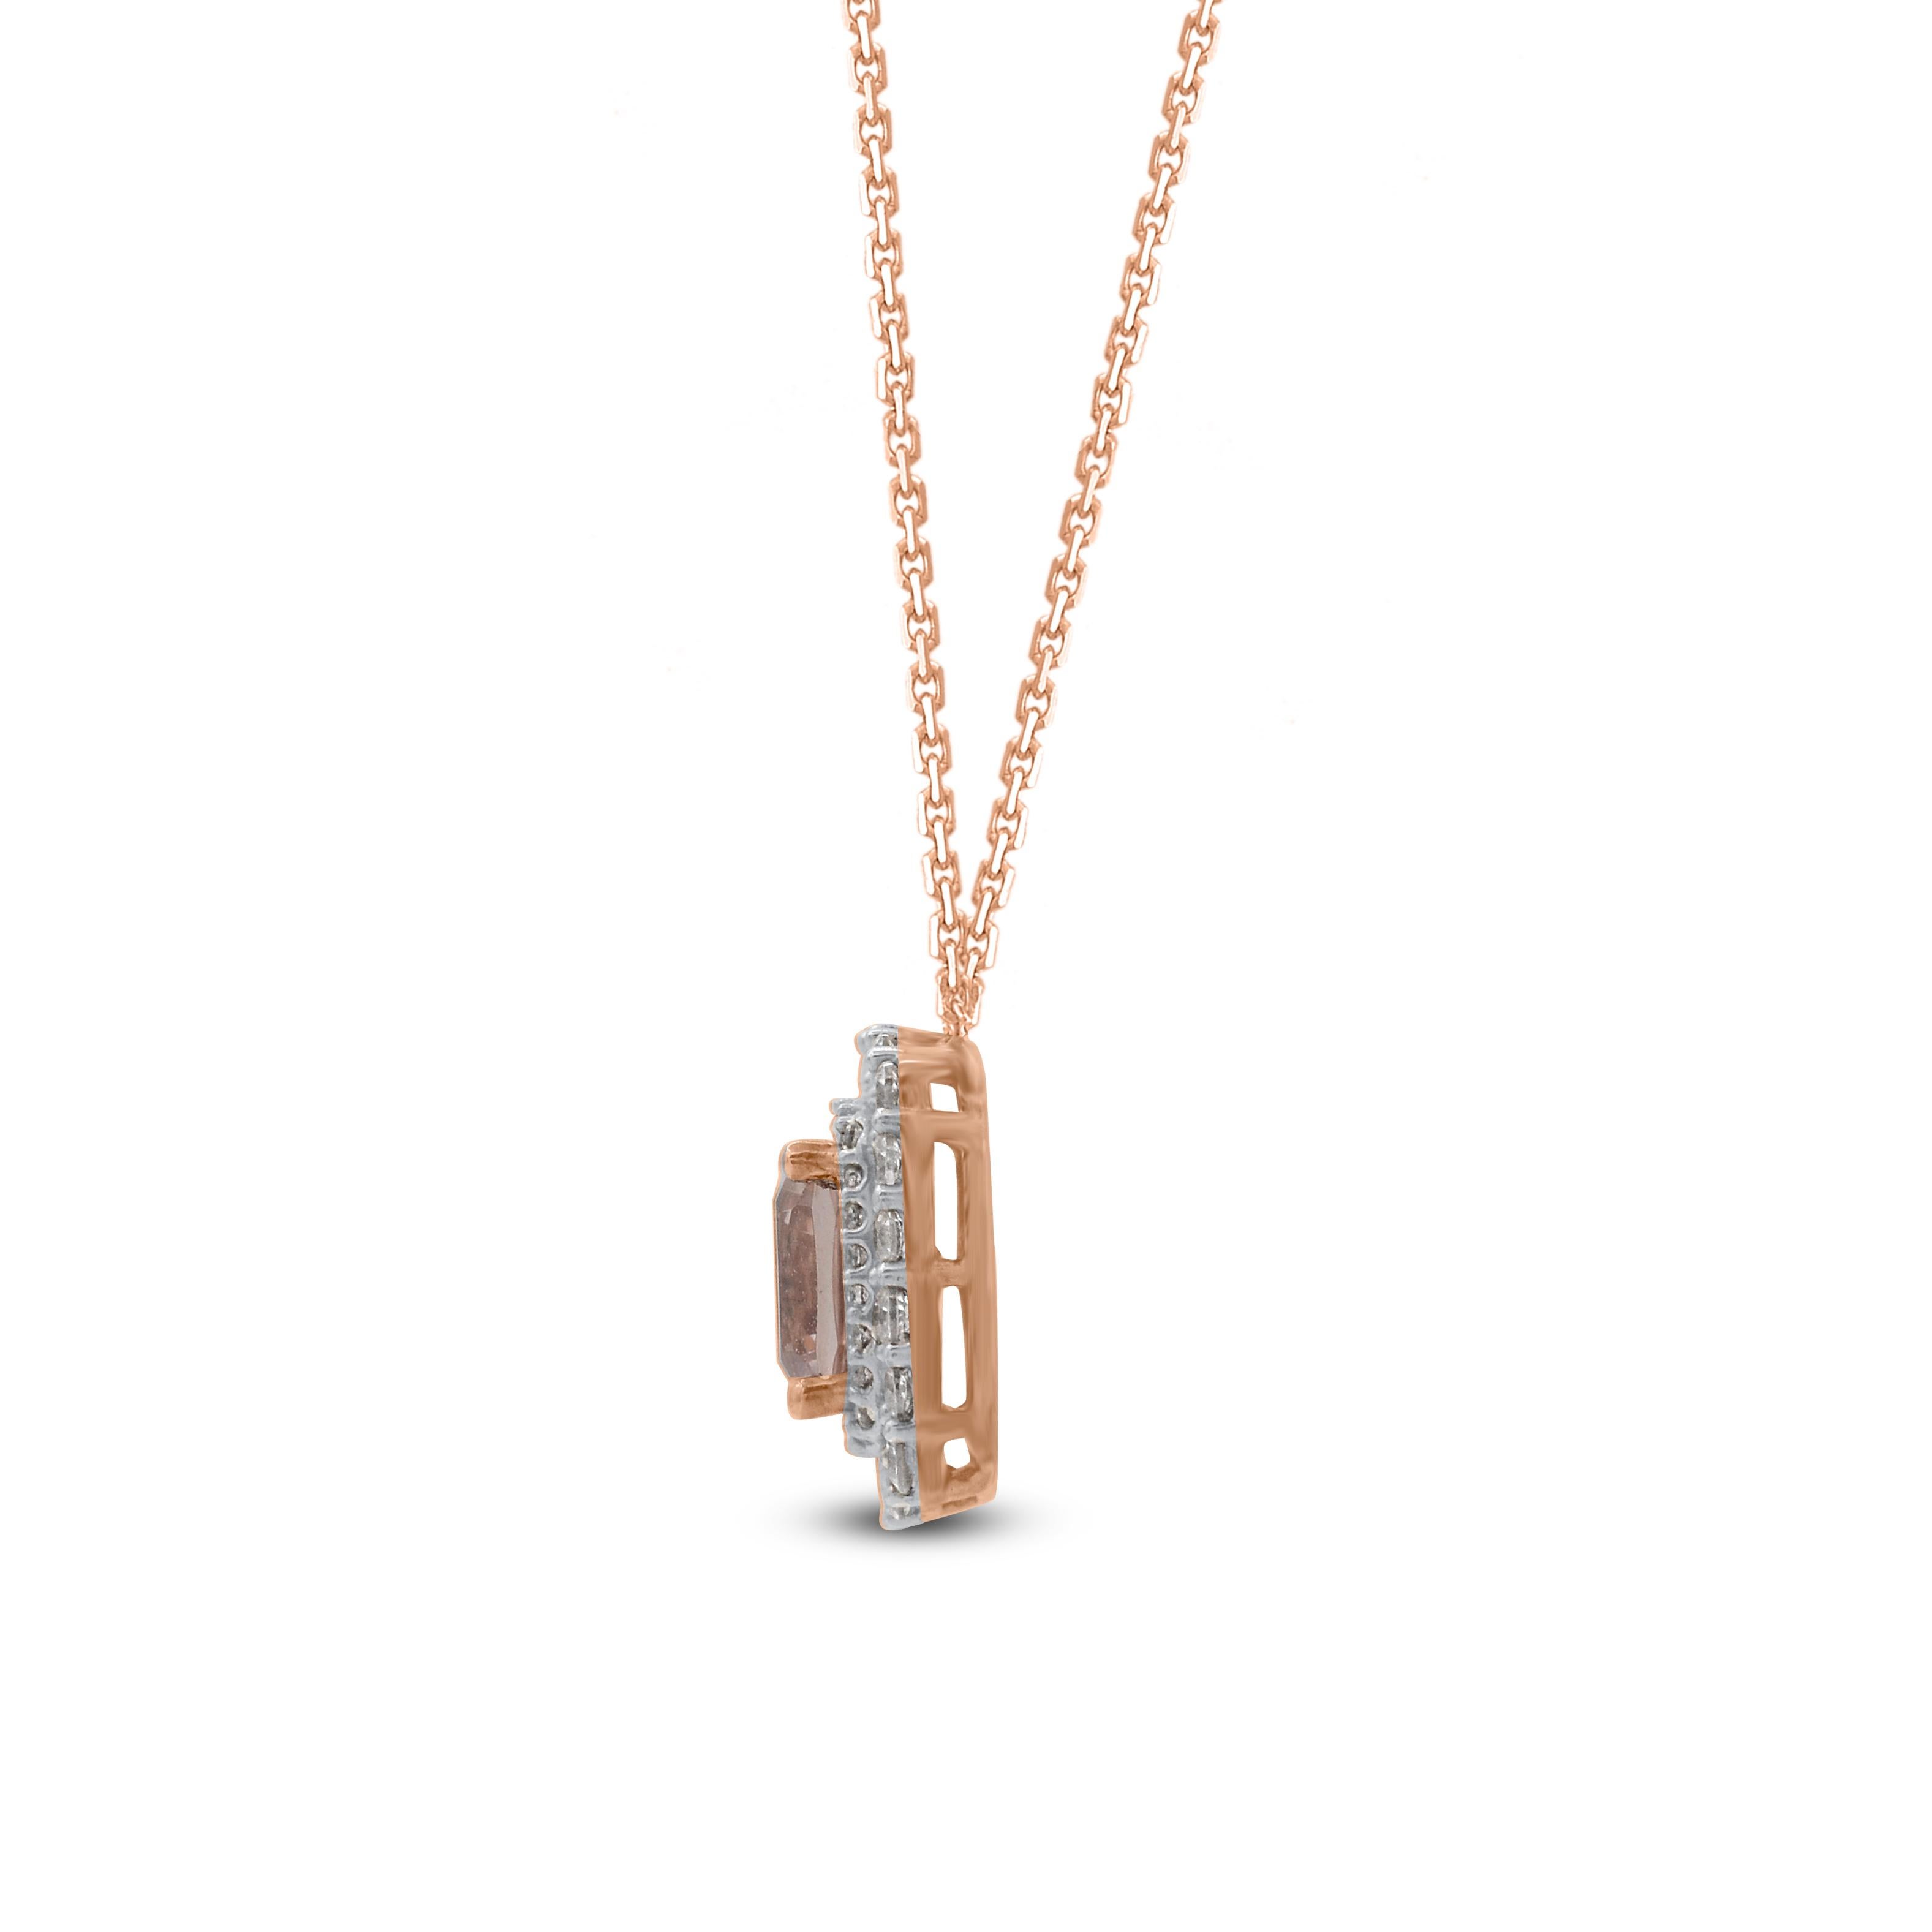 This beautiful halo pendant necklace is studded with 48 single cut, brilliant cut natural diamonds and 1 cushion morganite in prong setting. The total diamond weight of these diamond pendant is 1.50 carats. All the diamonds are H-I color, I-2